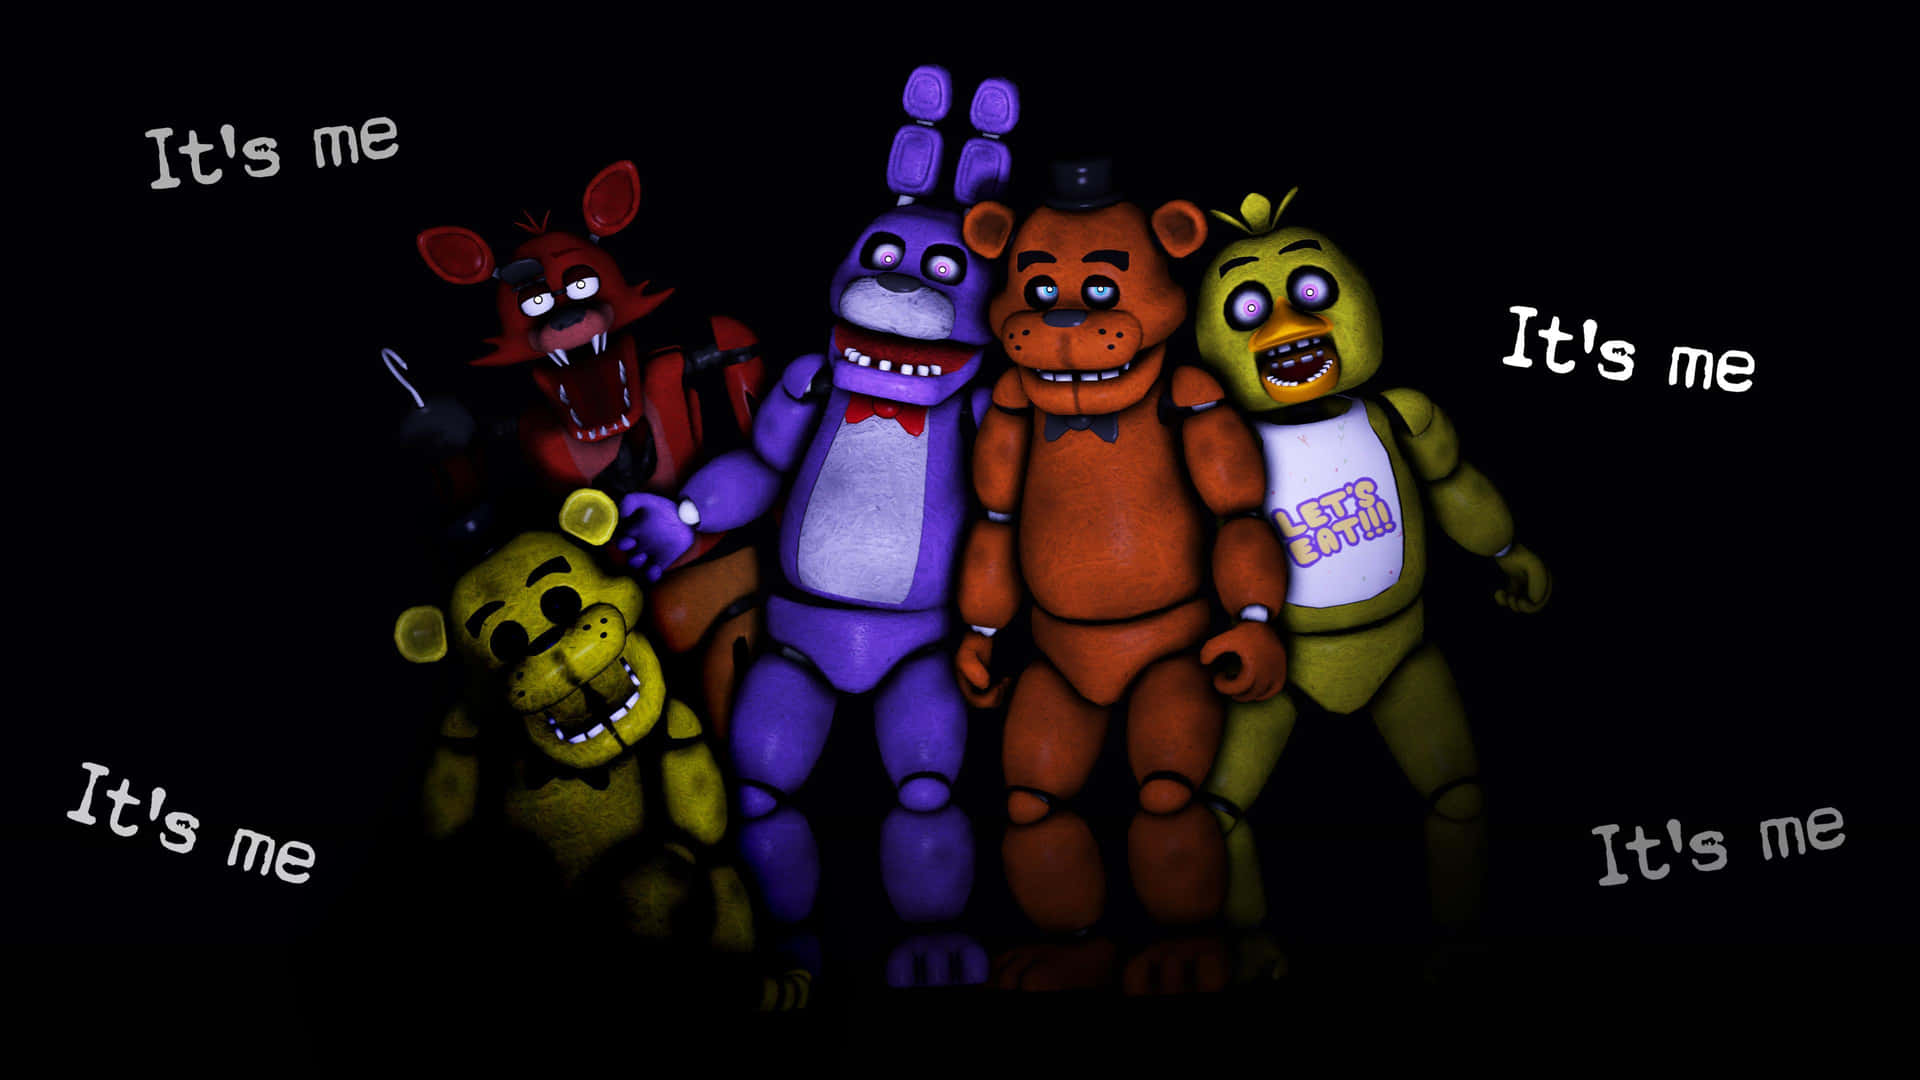 Advanced Animatronic Characters Entertaining on Stage Wallpaper